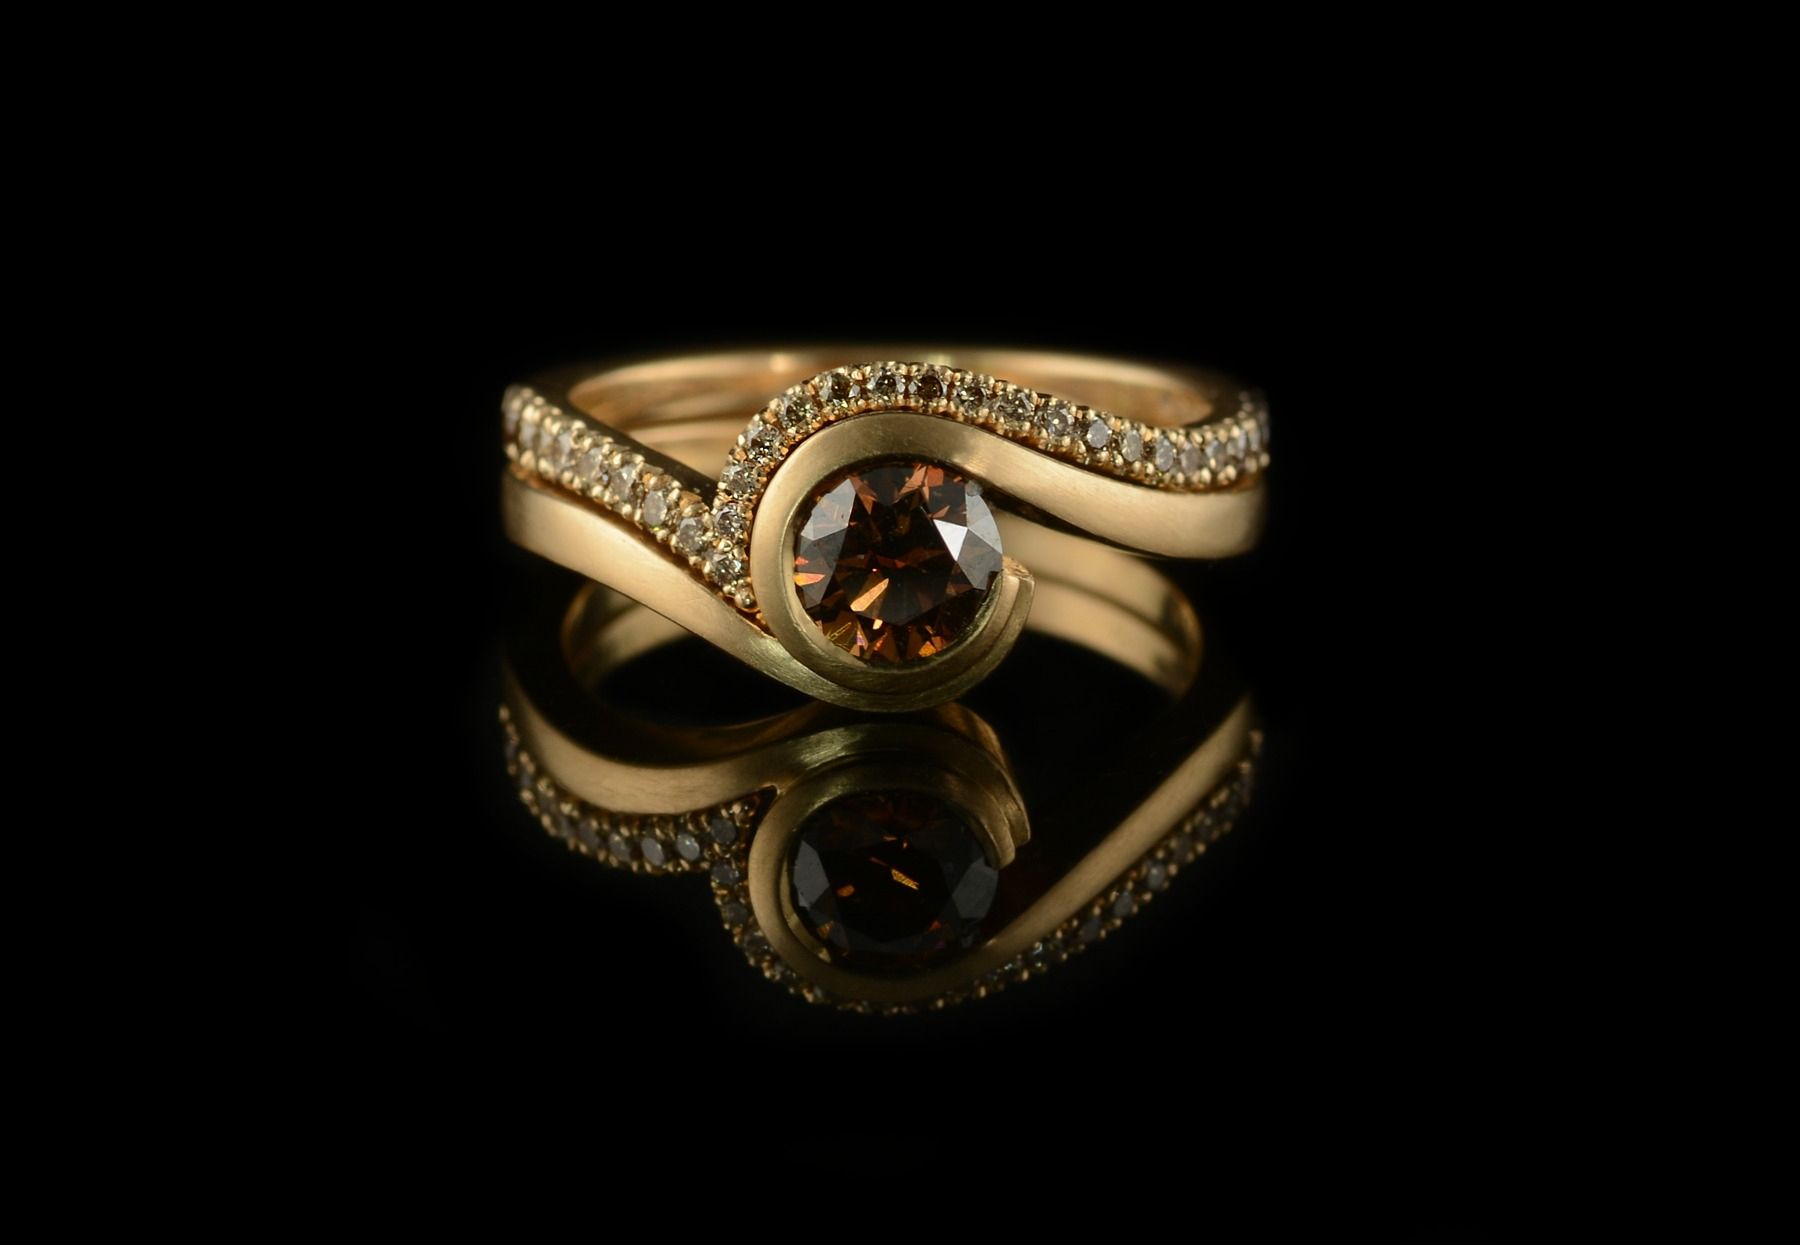 Wave Engagement Rings Archives – Mccaul Goldsmiths With Current Wave Diamond Wedding Bands (View 21 of 25)